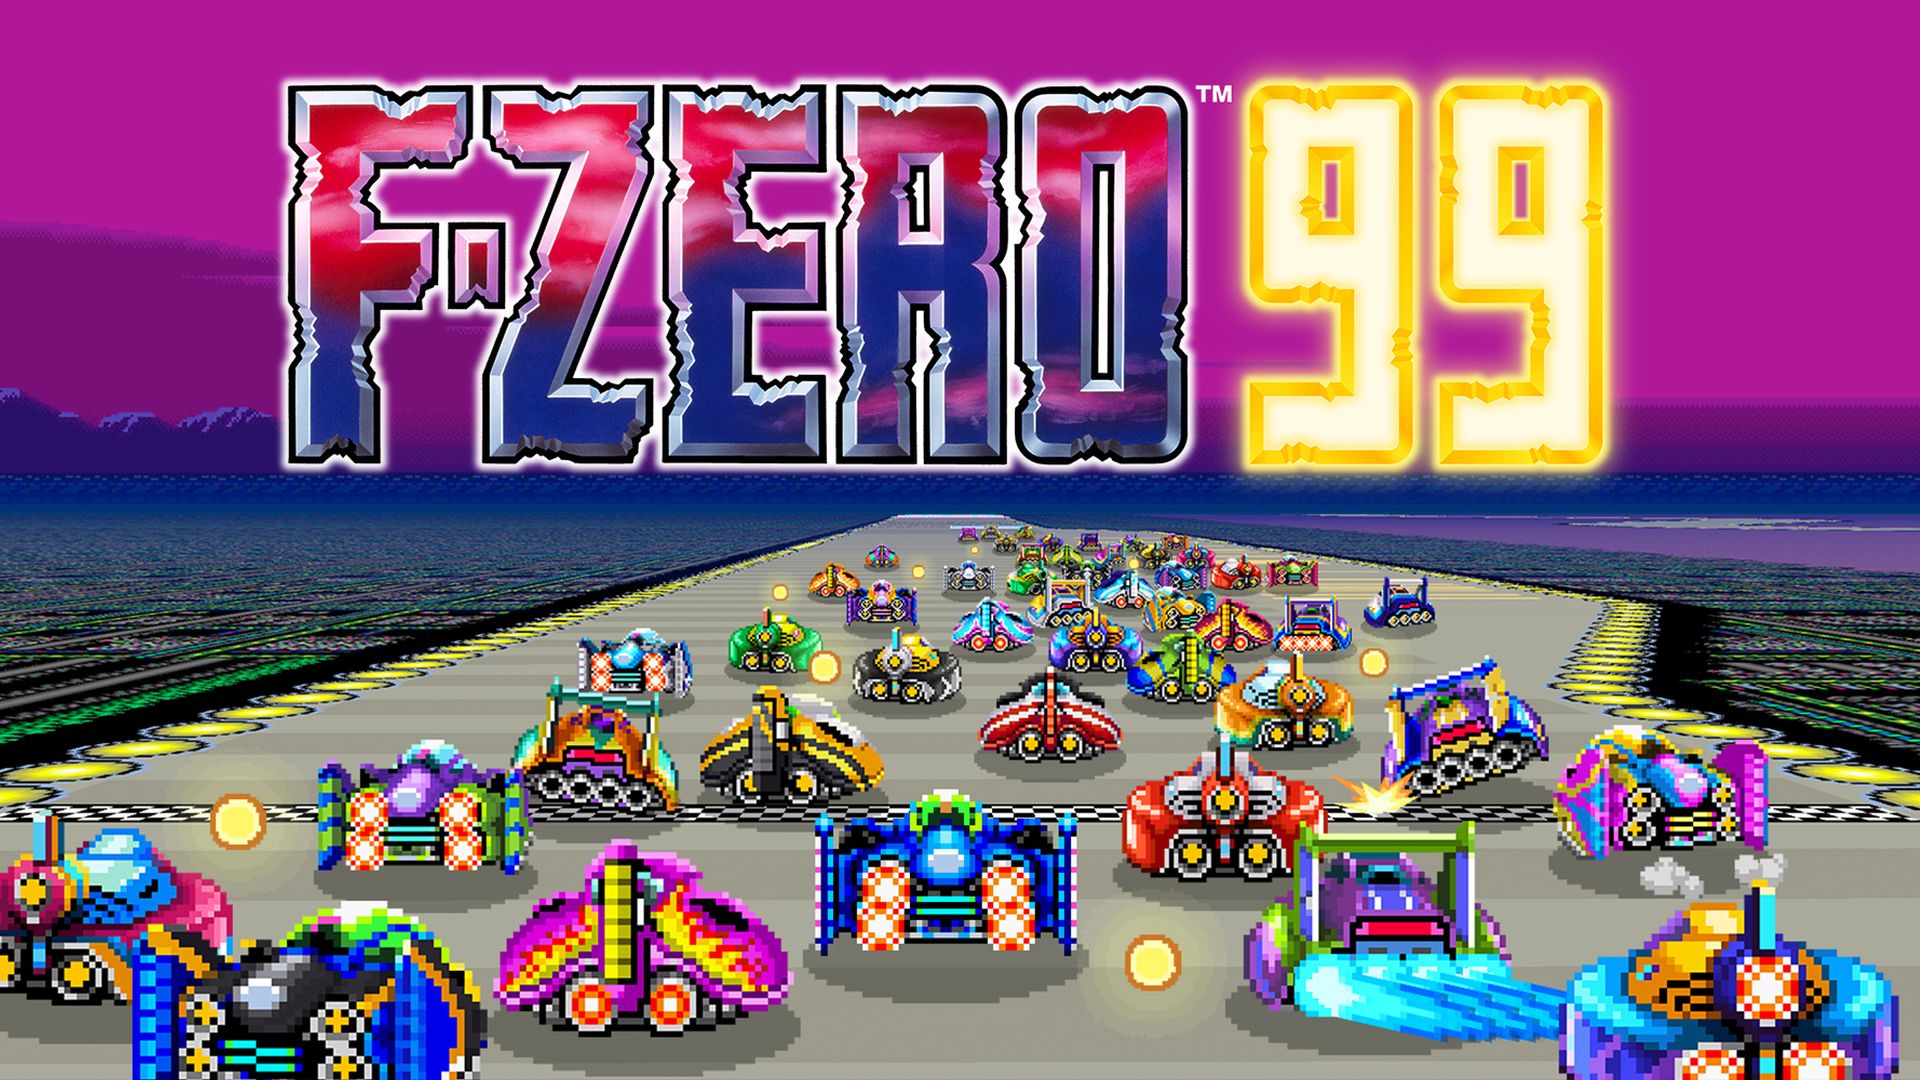 F-Zero 99 update to be released on 28th March brings mirror Grand Prix and steering assistant to the game